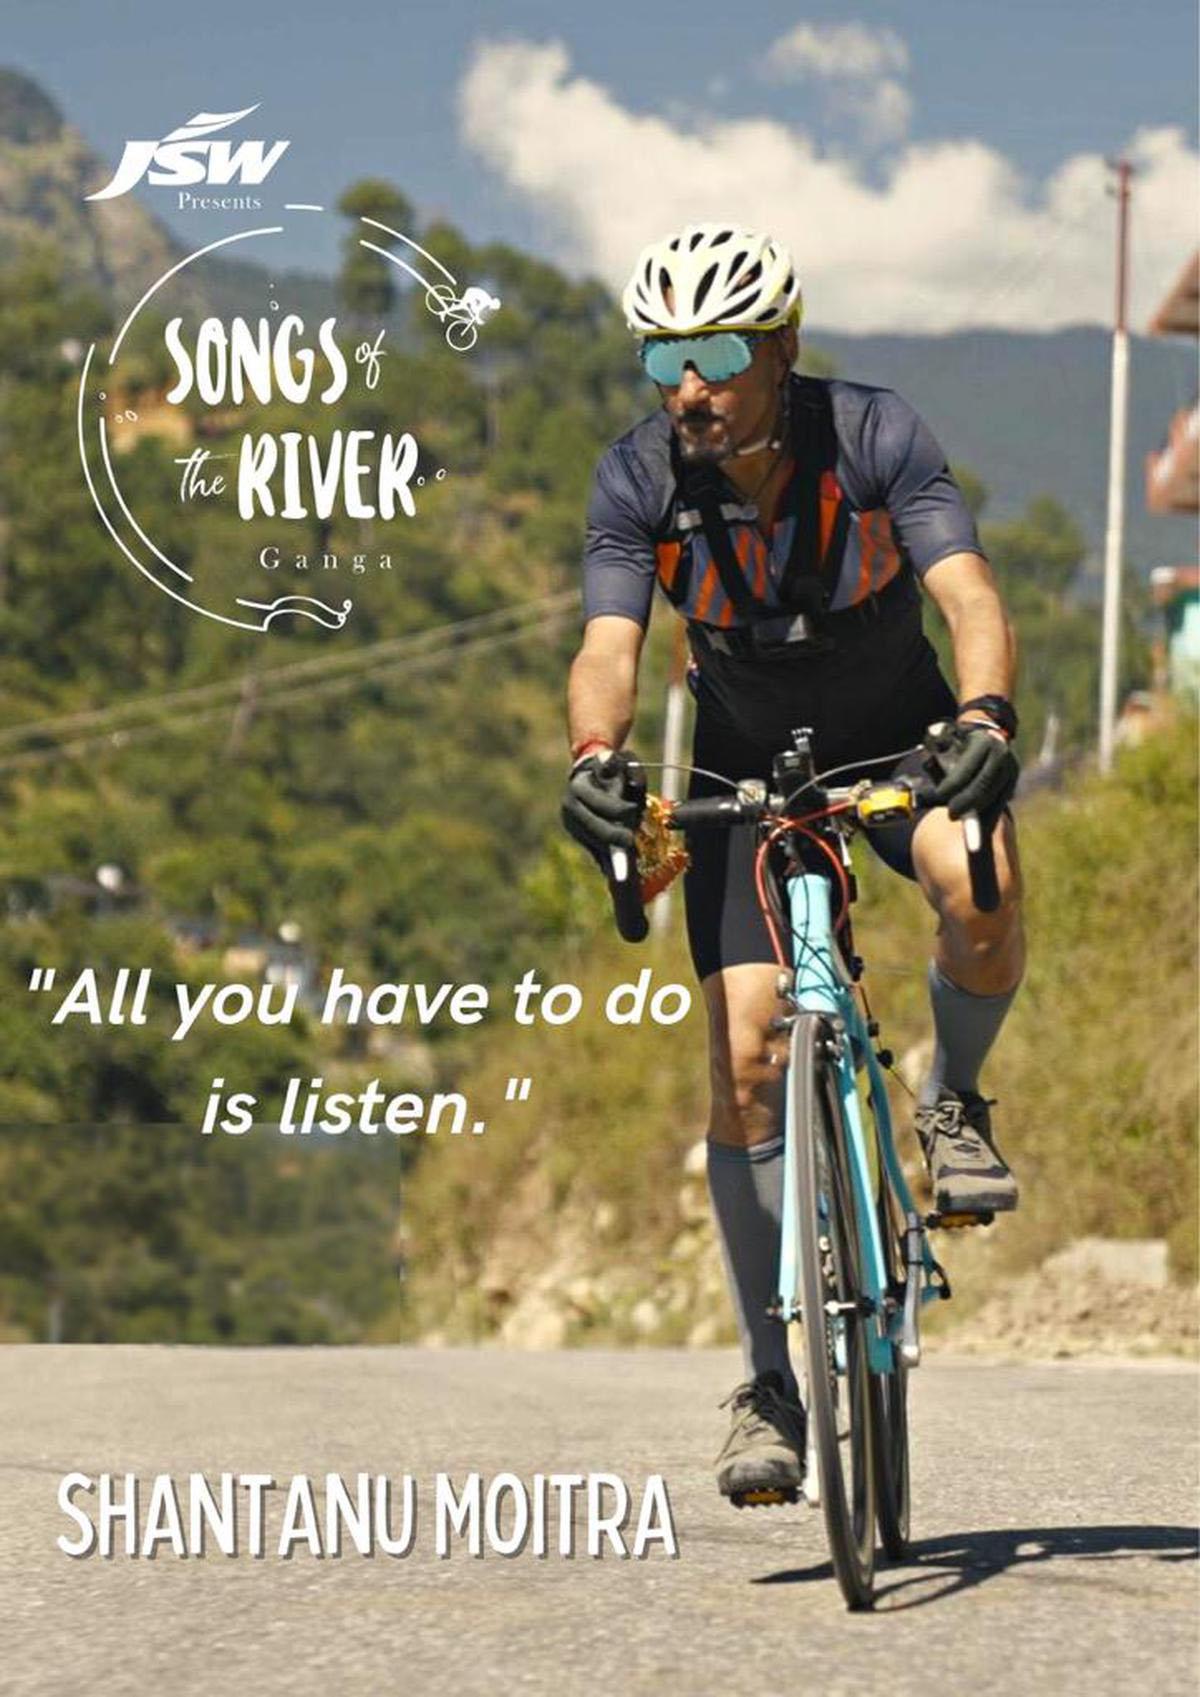 Songs of the River, a series by Shantanu Moitra, chronicles his cycling journey along the banks of the Ganges 